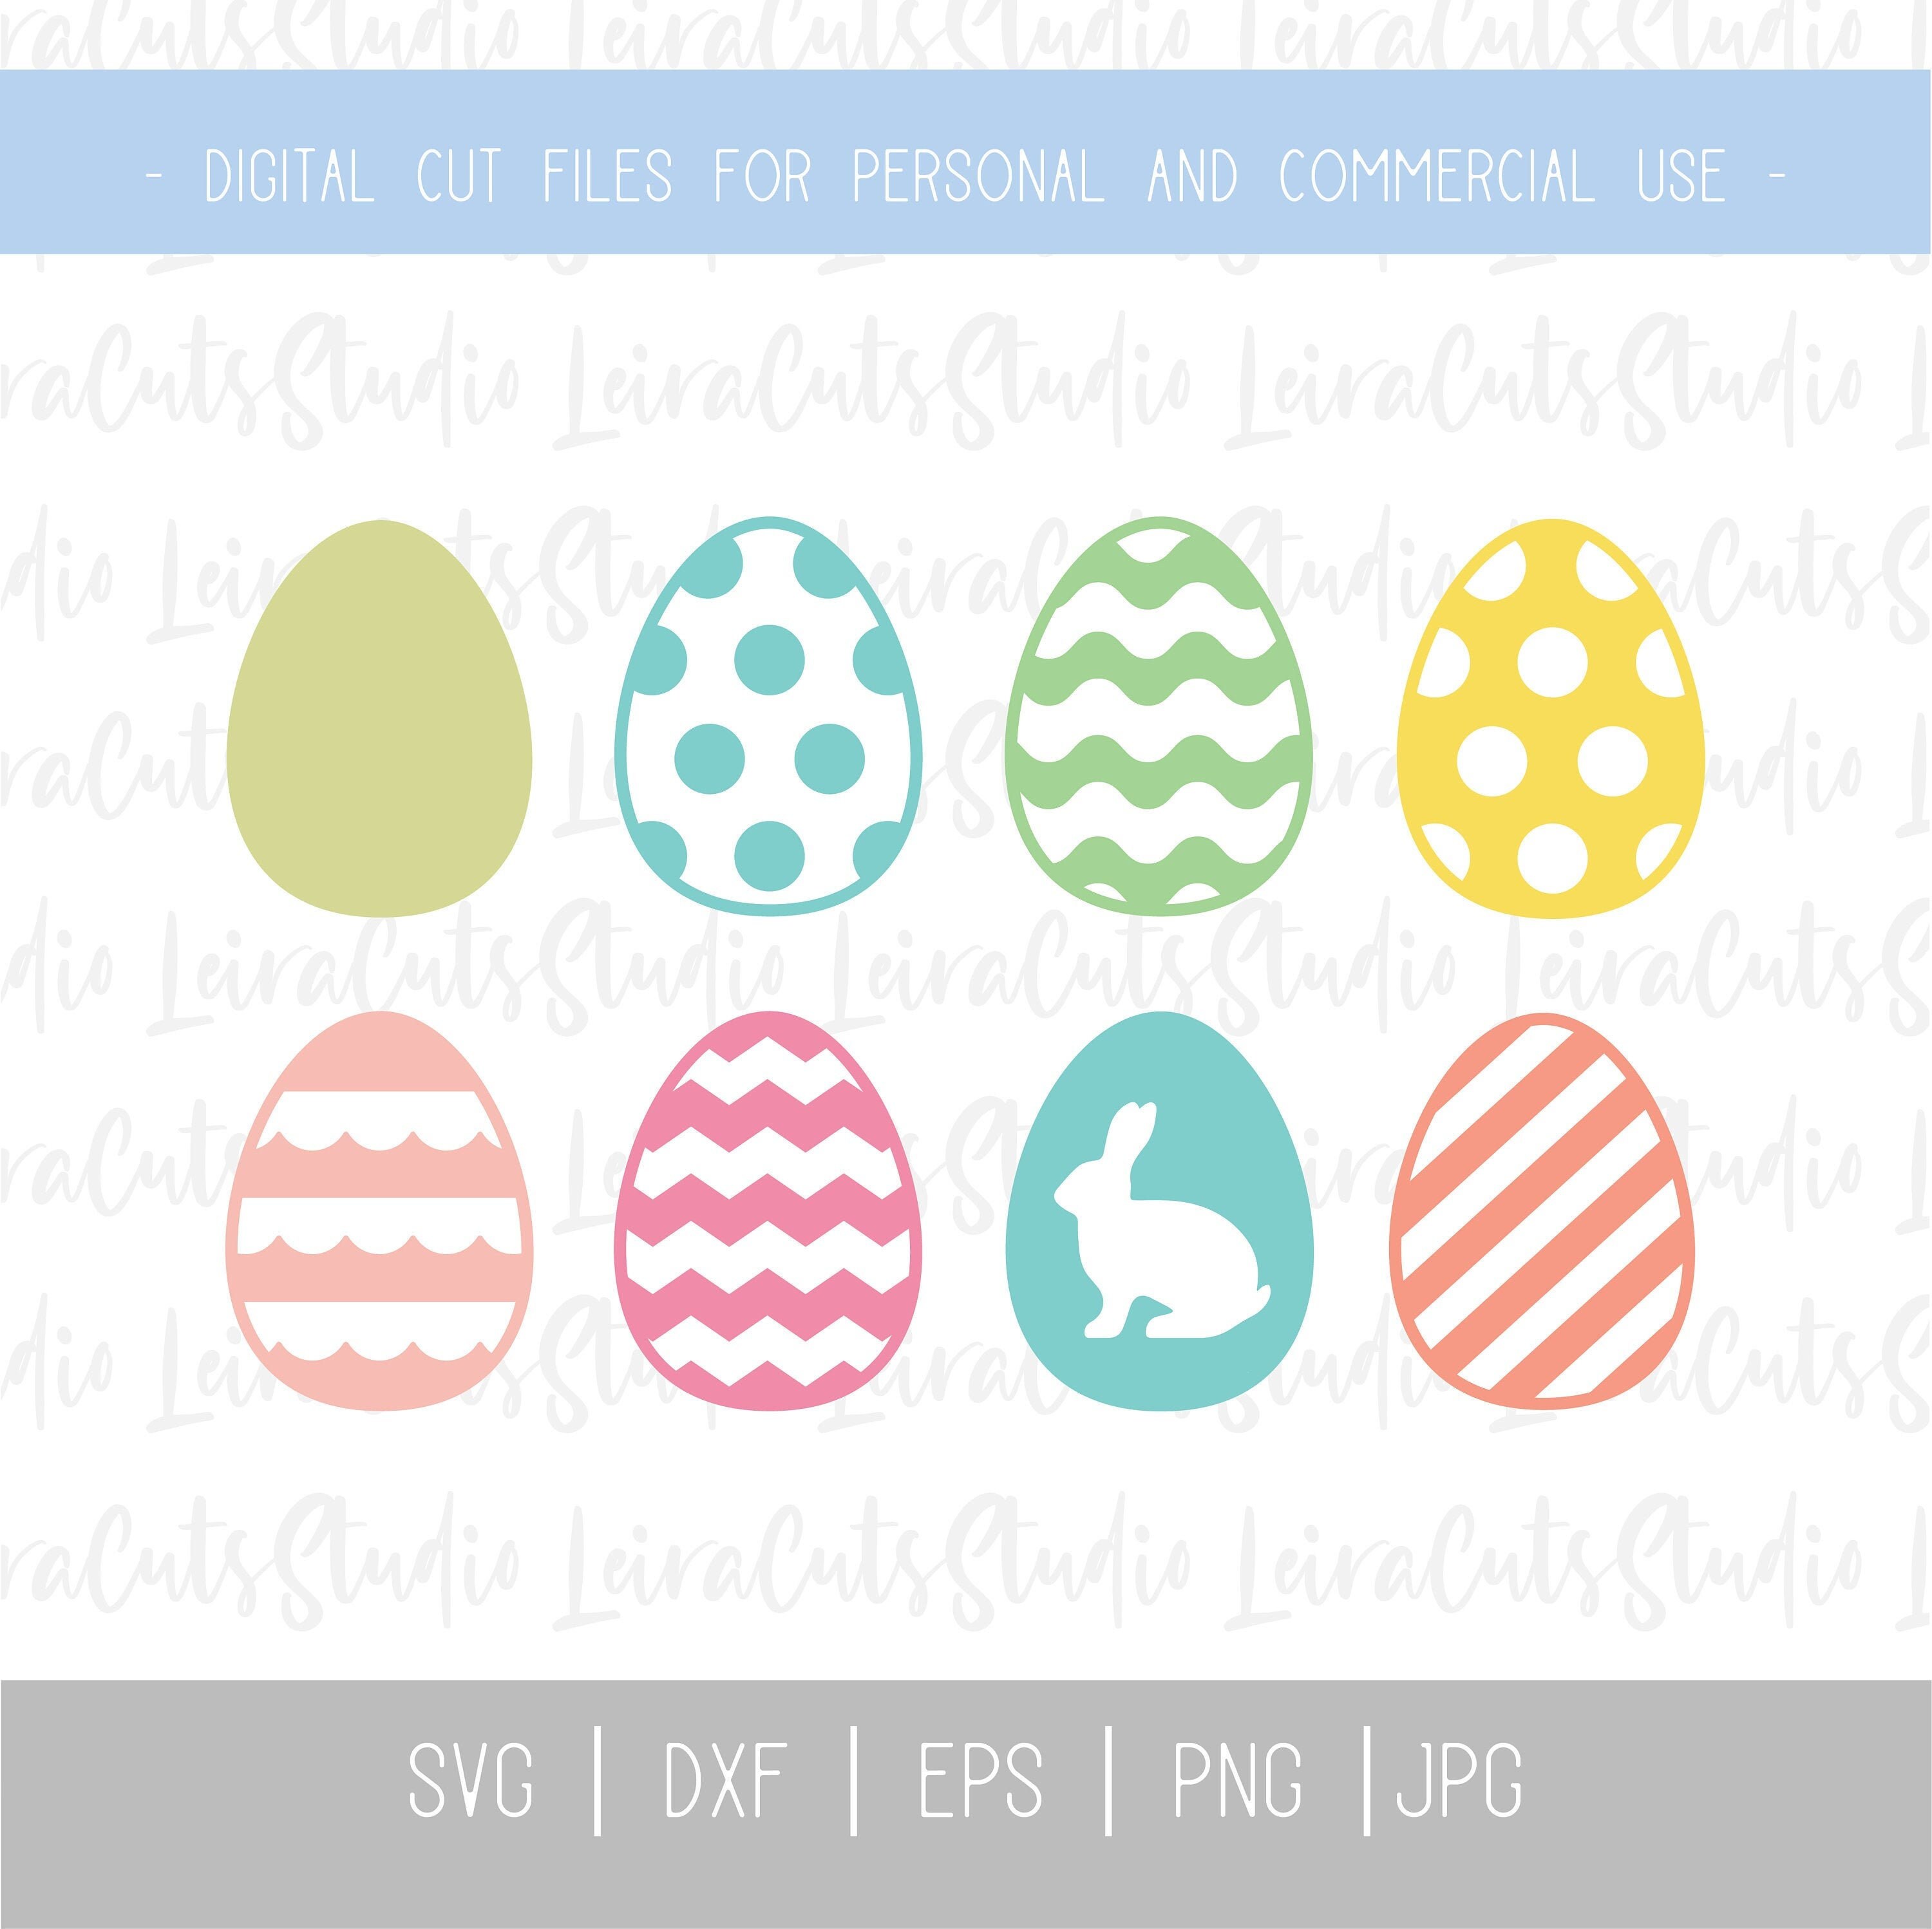 easter eggs nature 16761895 PNG